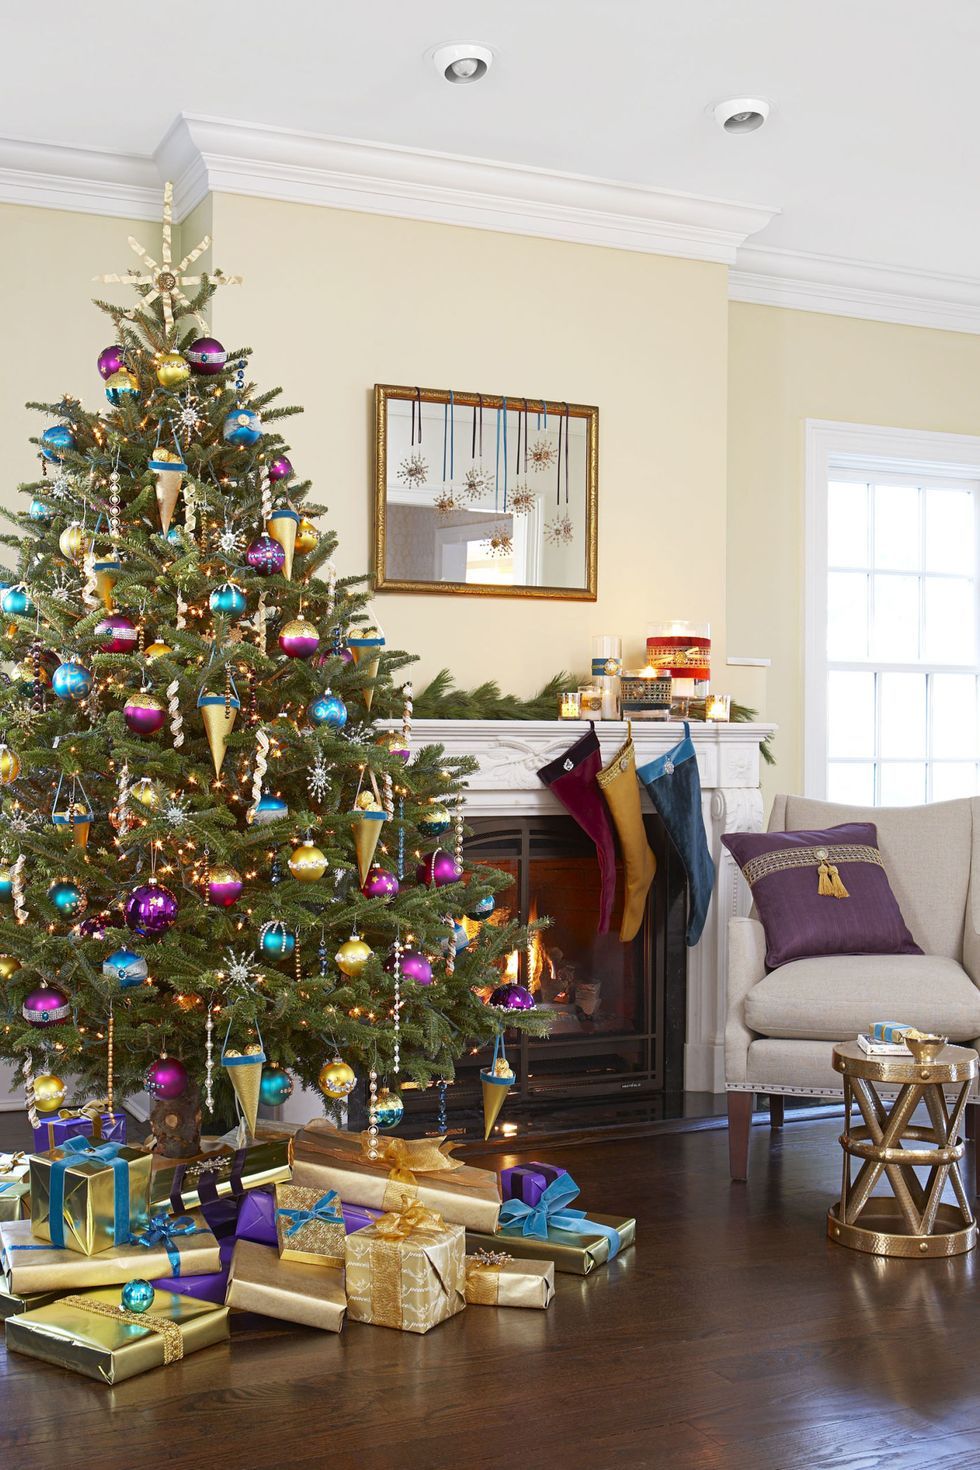 18 Pretty Purple Christmas Decorations - Best Purple Ornaments and ...